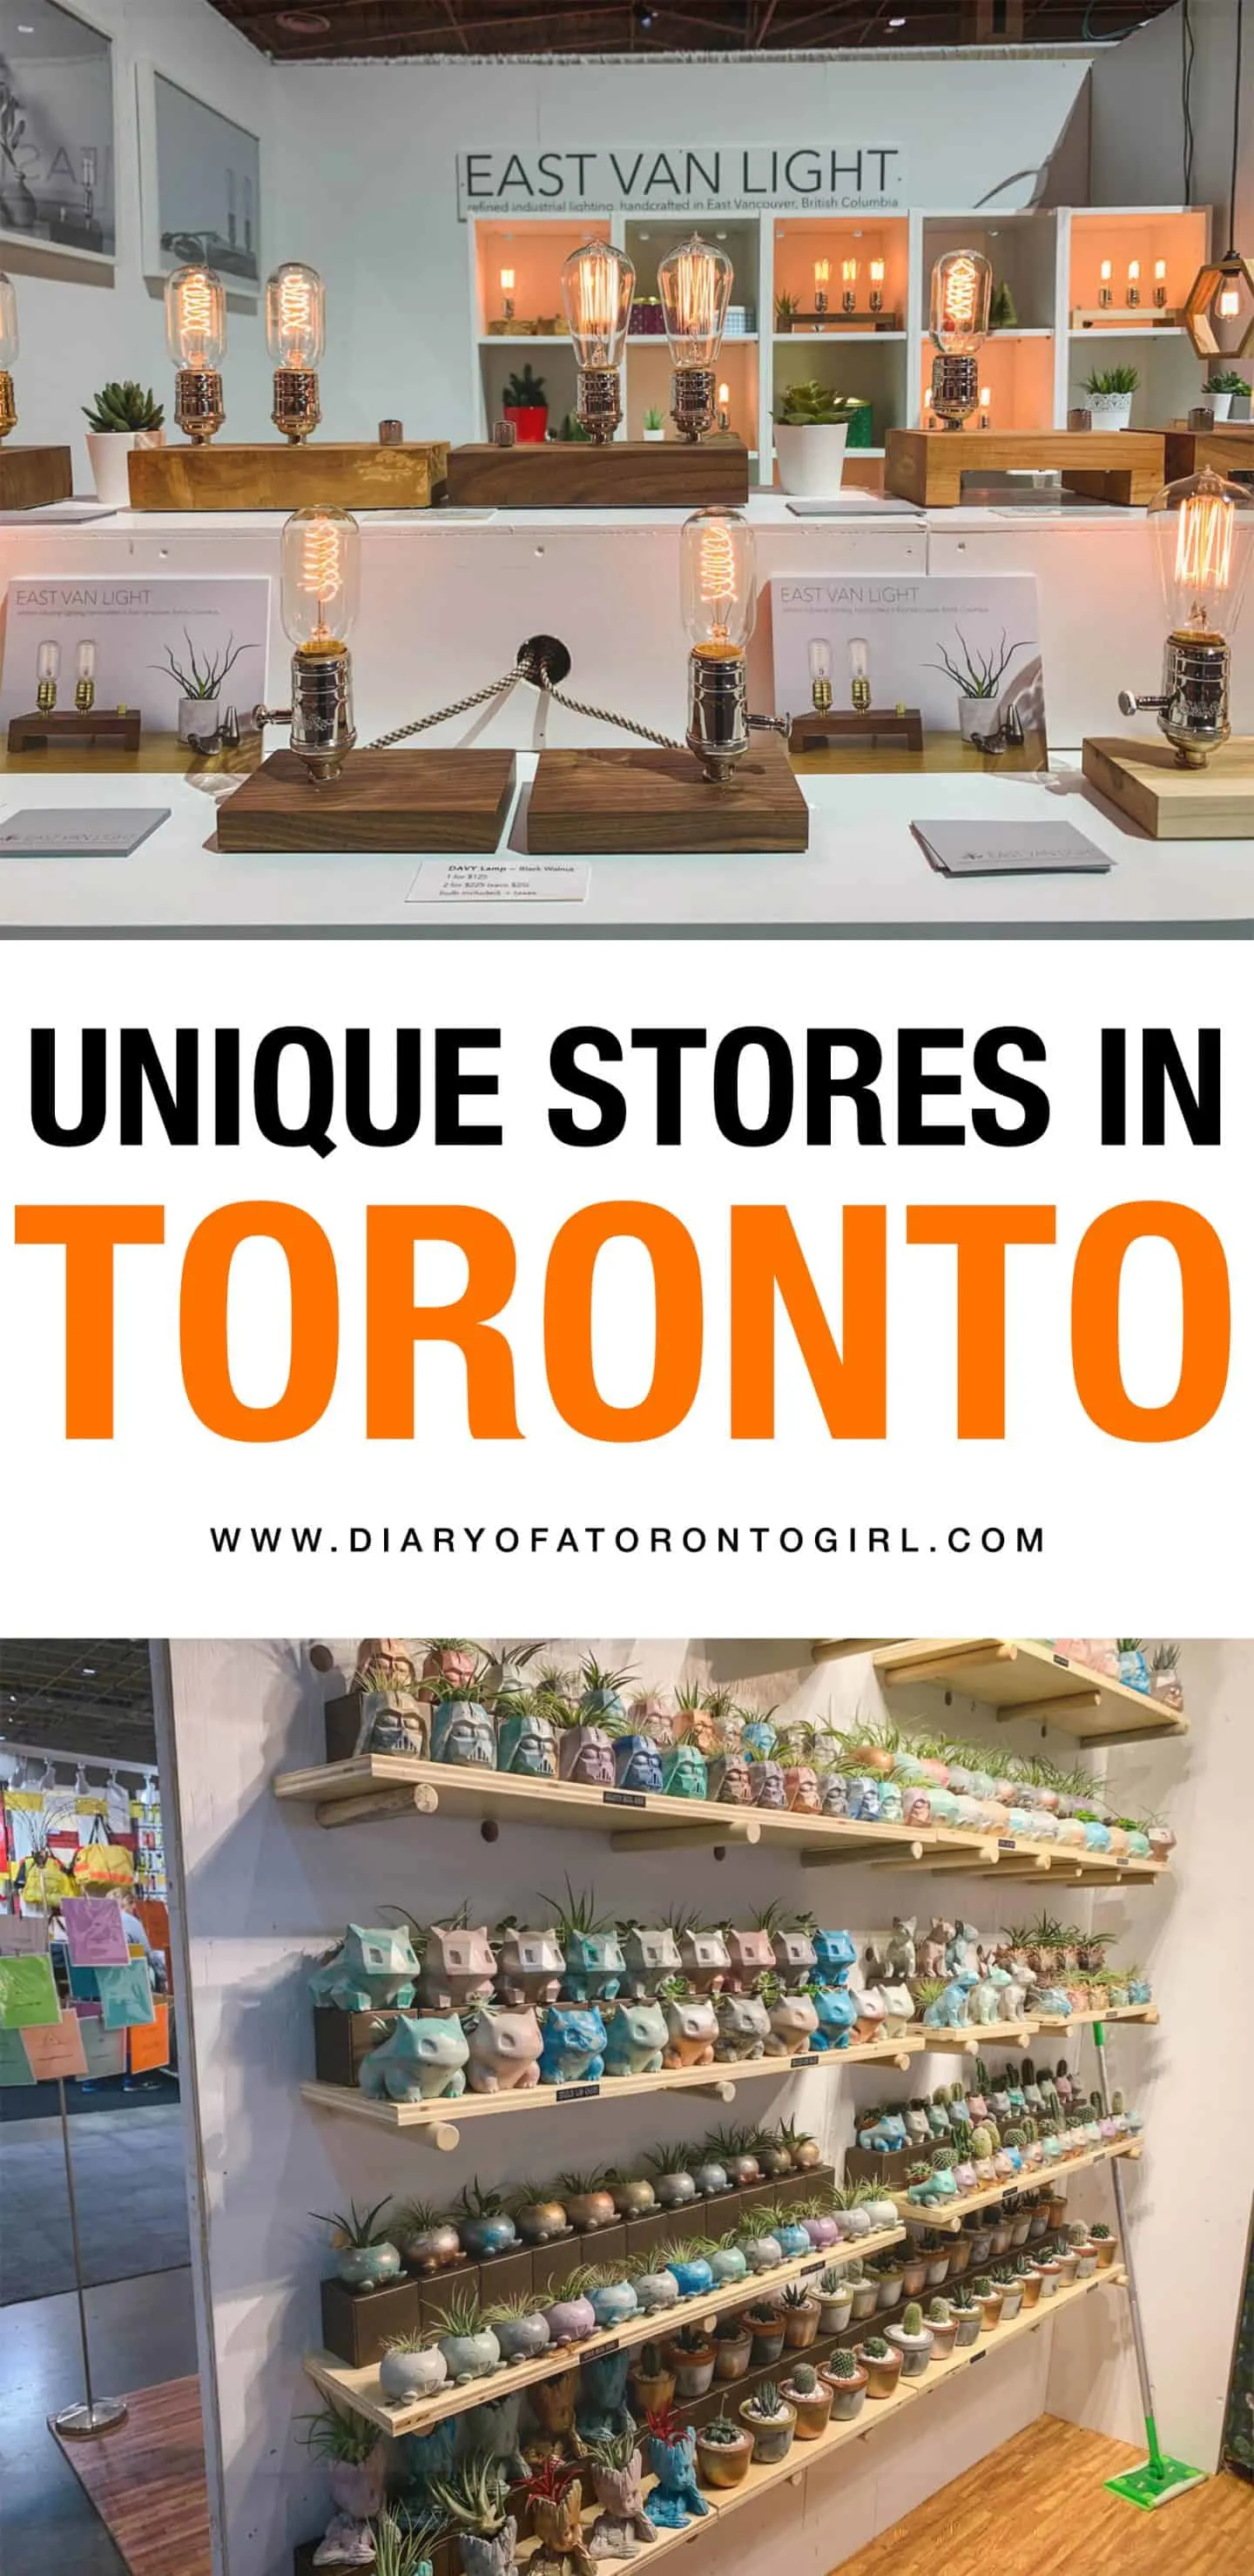 Looking to find more unique Toronto gifts for your loved ones? Here are some great stores that are perfect for all of your gift shopping!